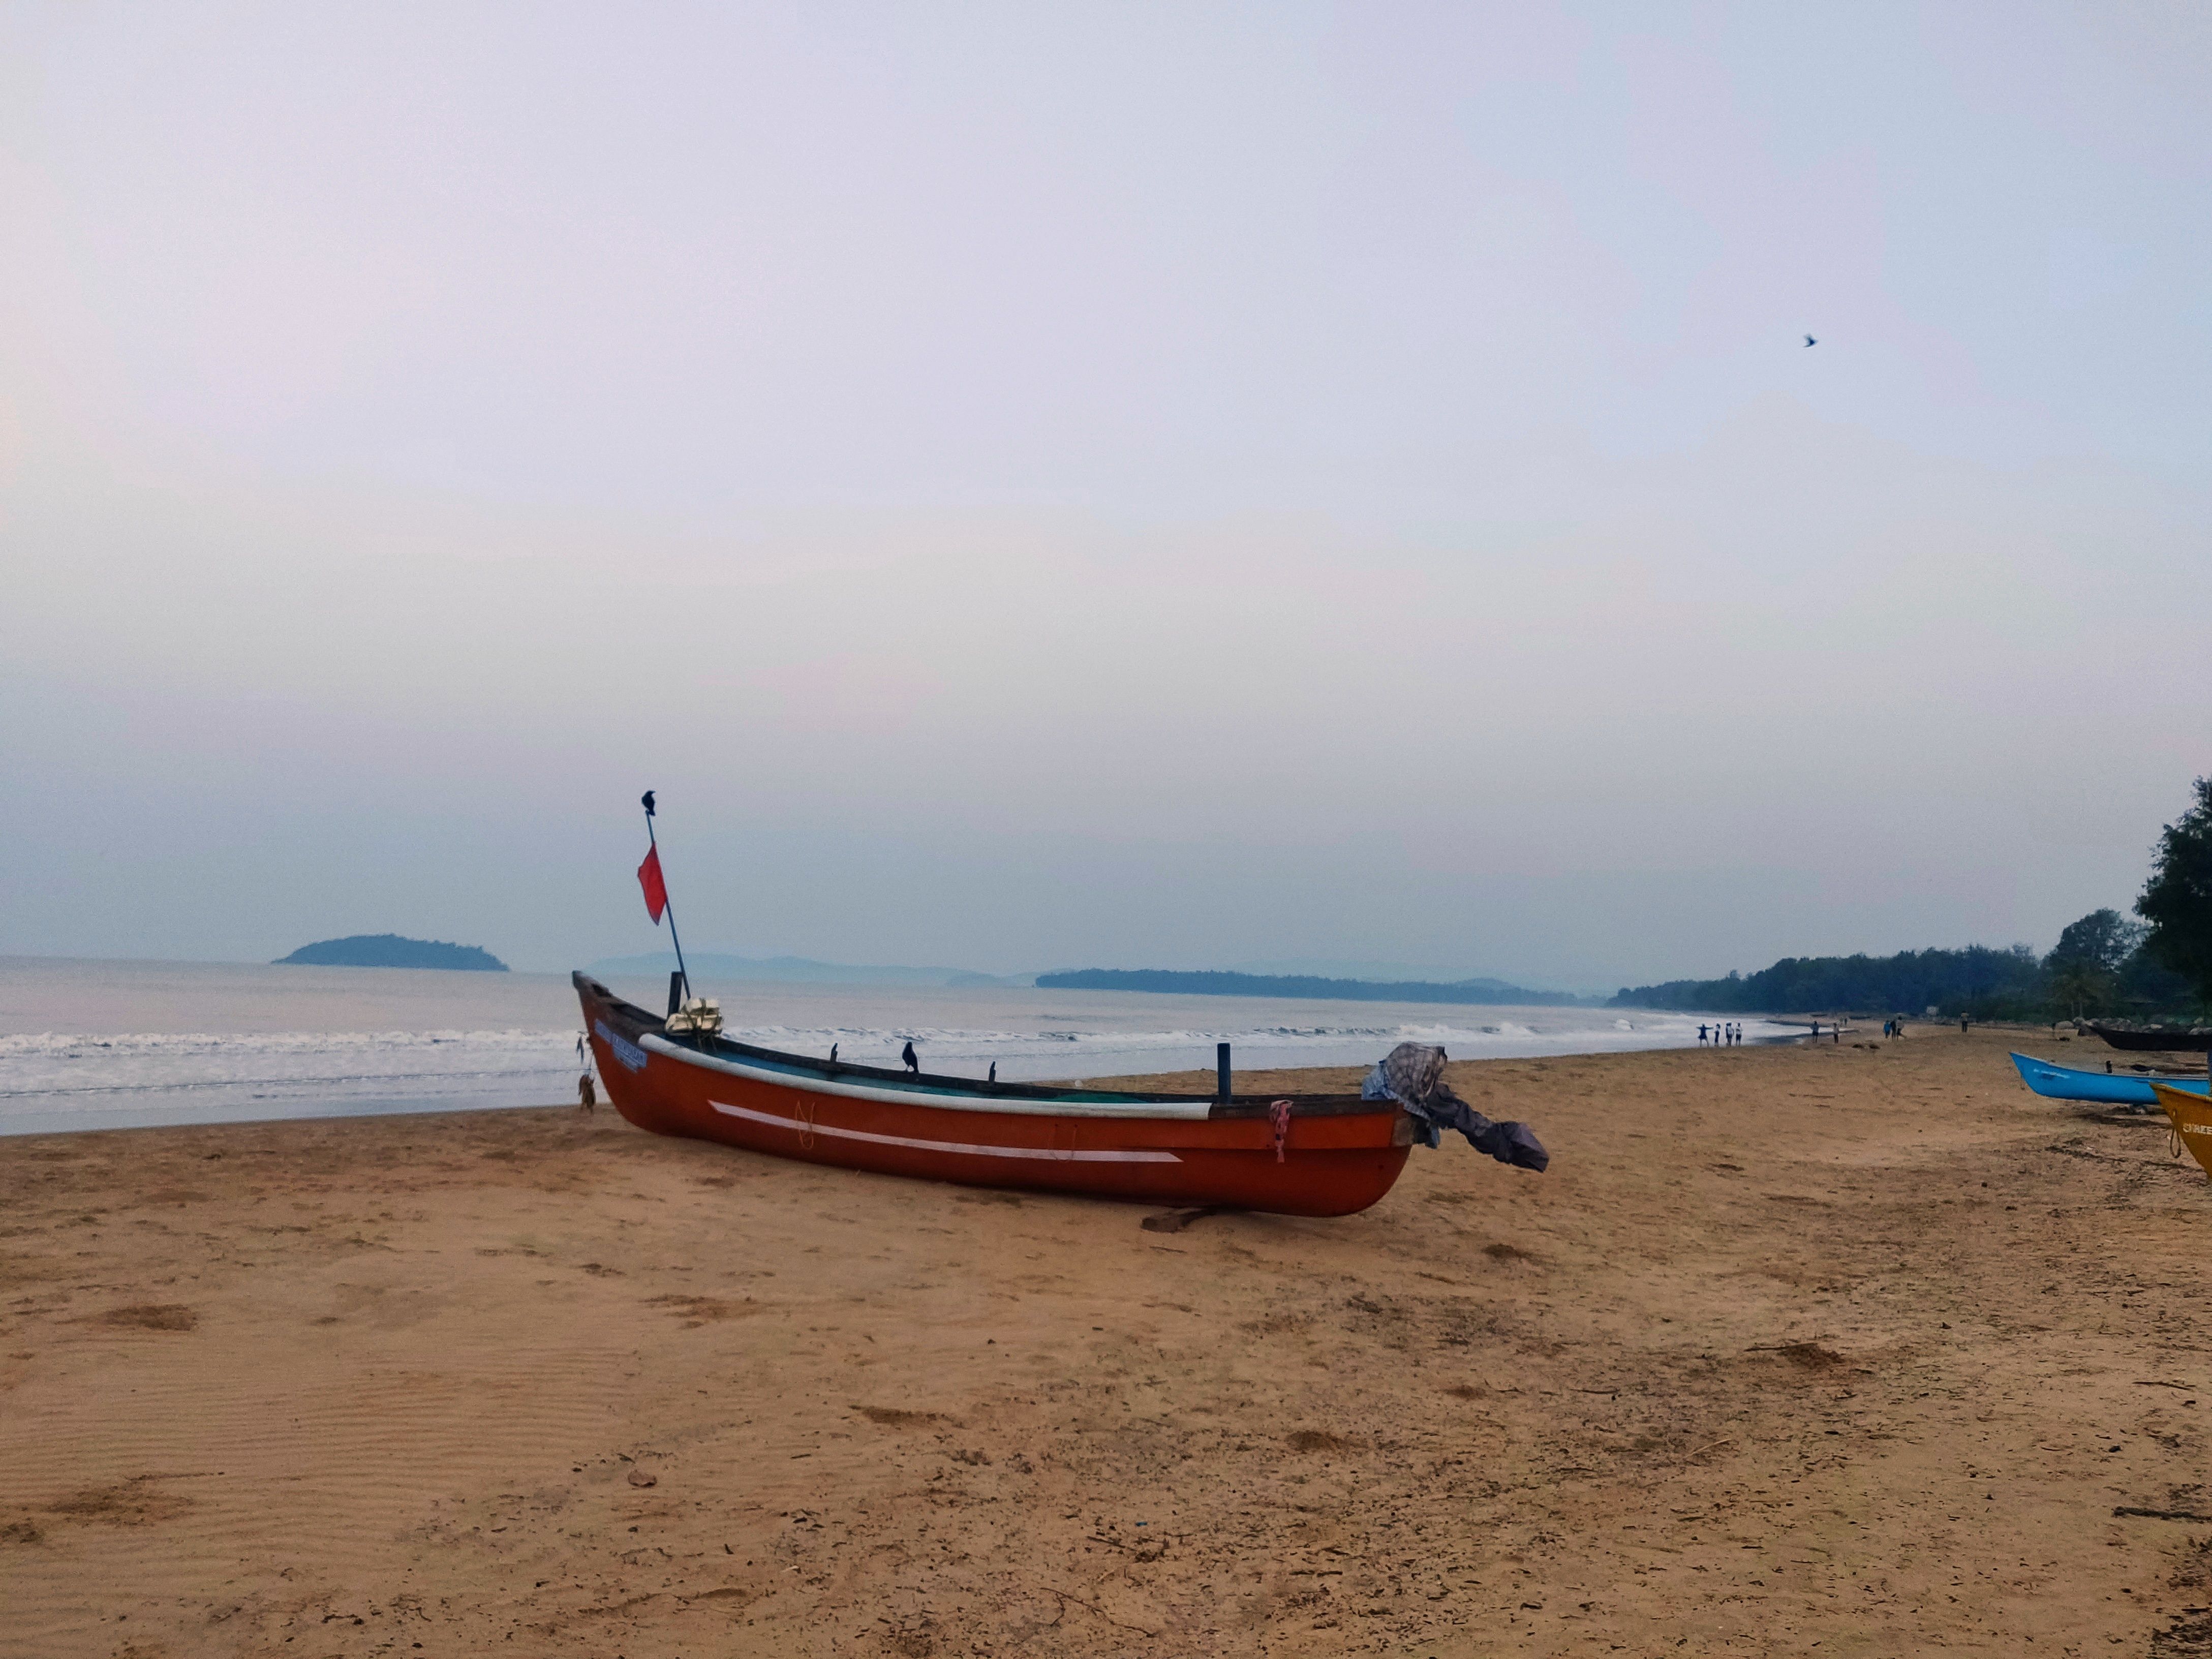 Fishing activities in Karwar face the dual threat of climate change and infrastructure projects. Image by Disha Shetty / IndiaSpend. India, 2020.